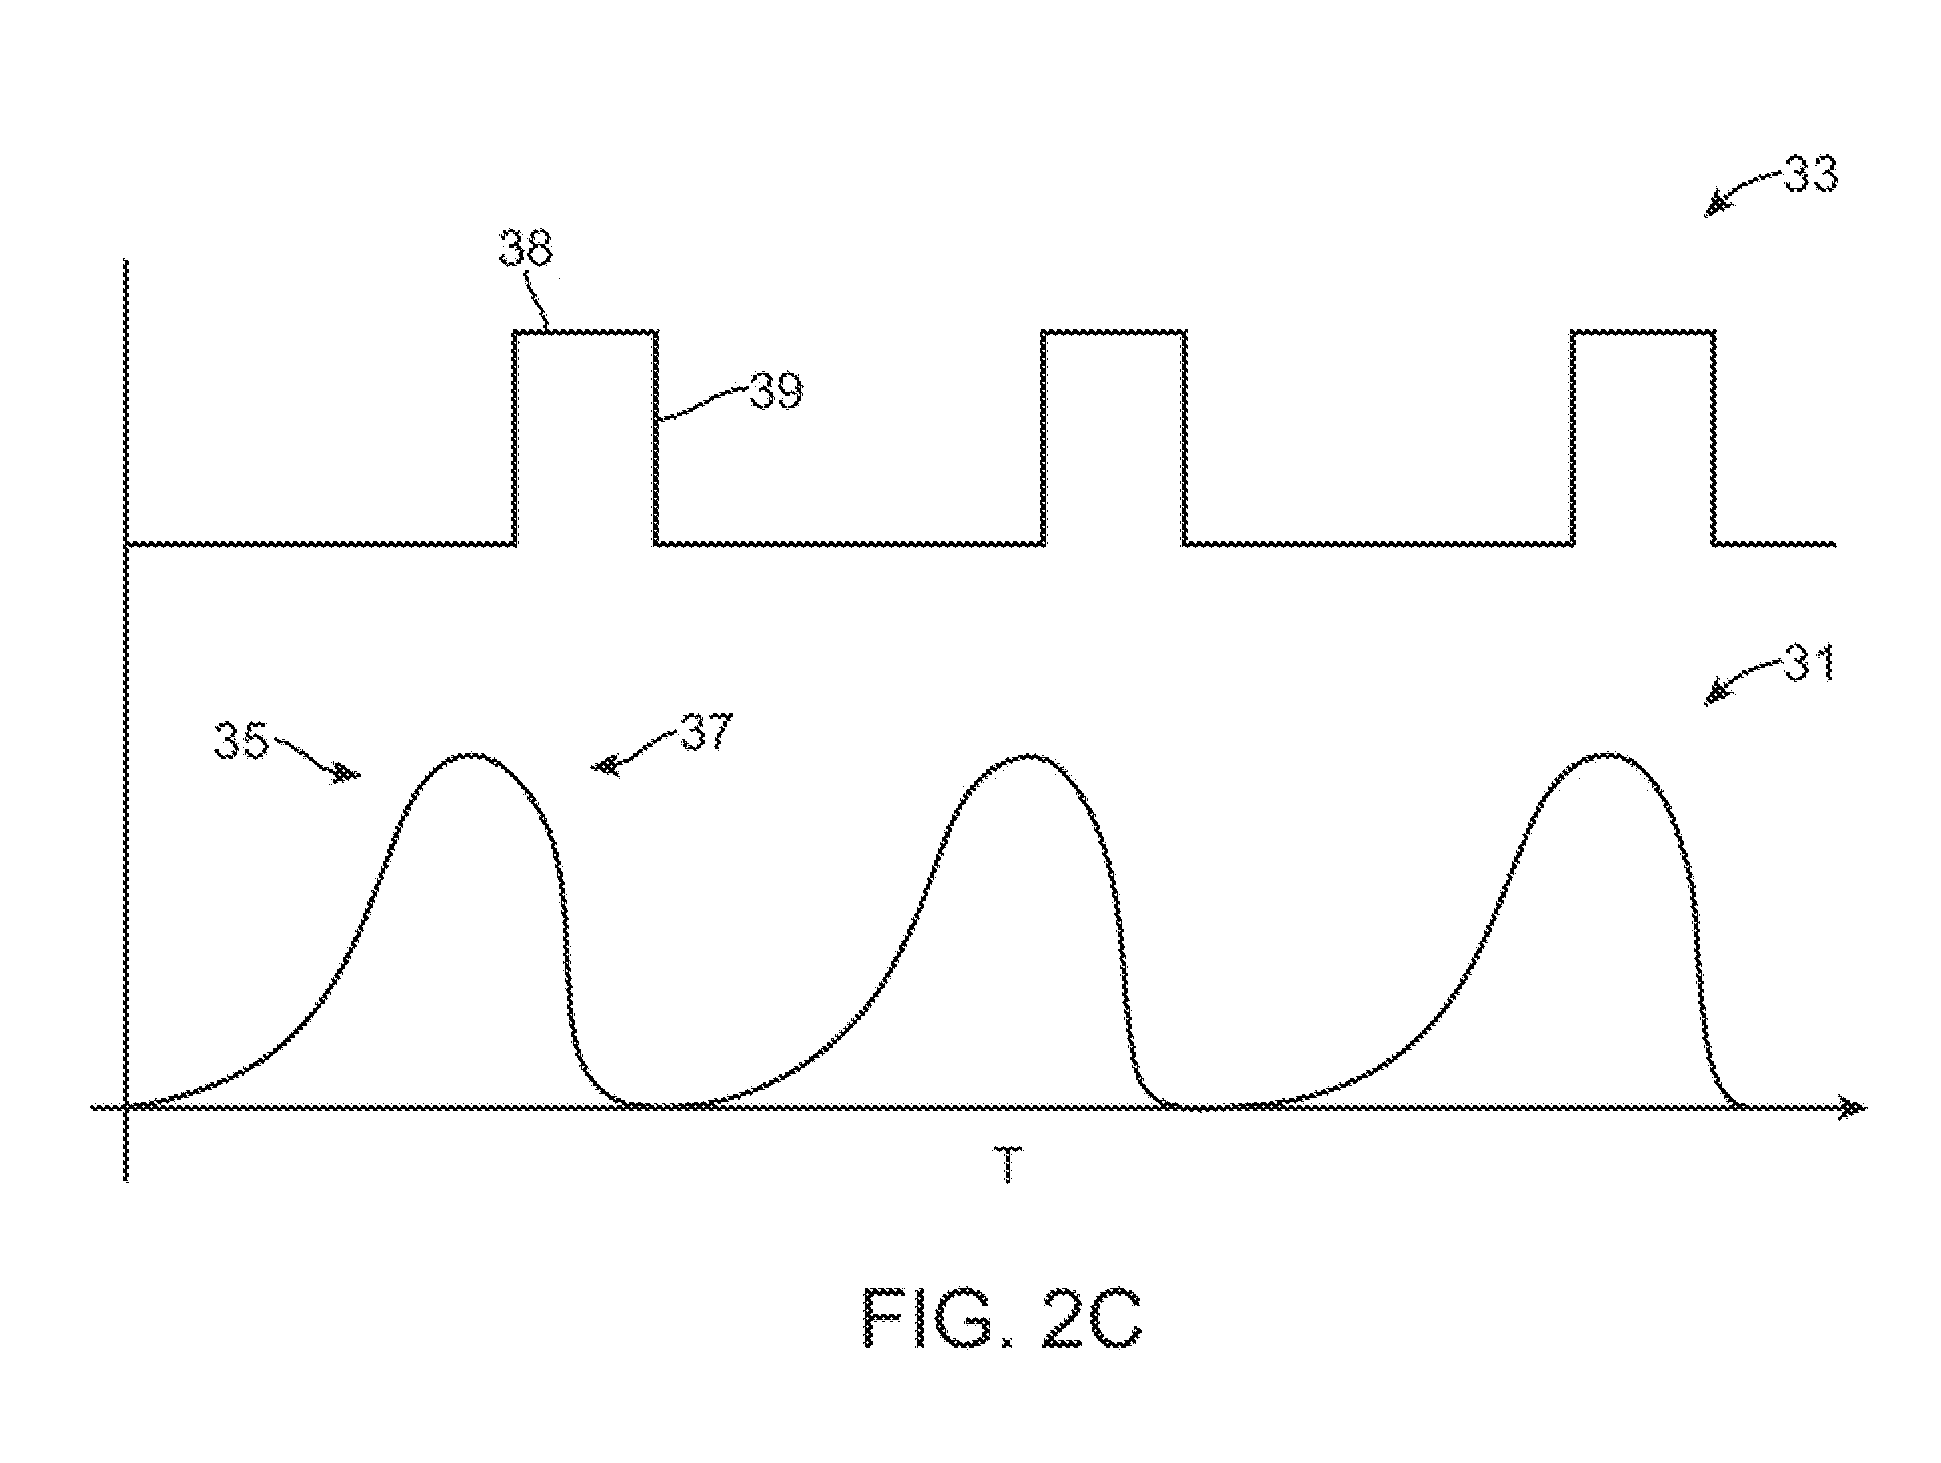 Extendable airflow restriction system